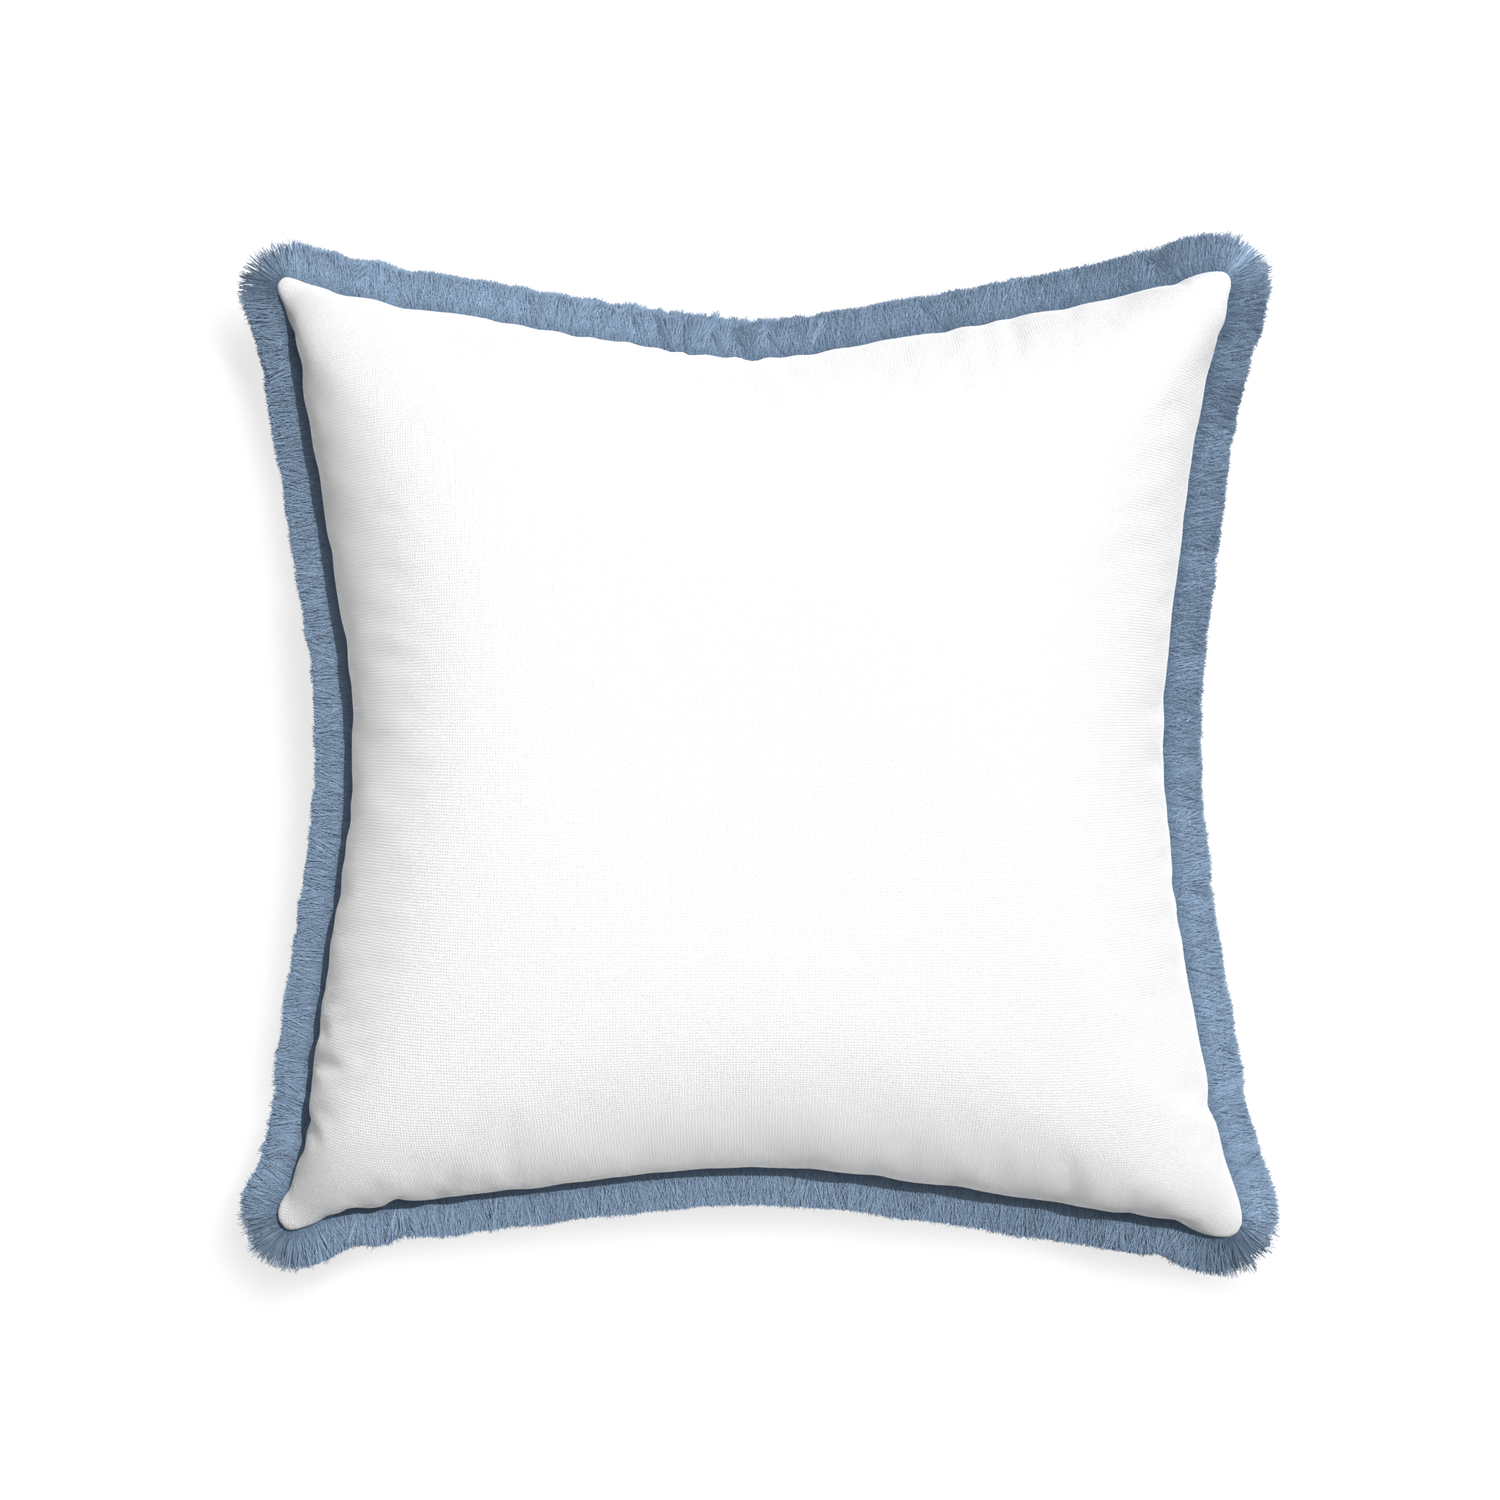 22-square snow custom white cottonpillow with sky fringe on white background